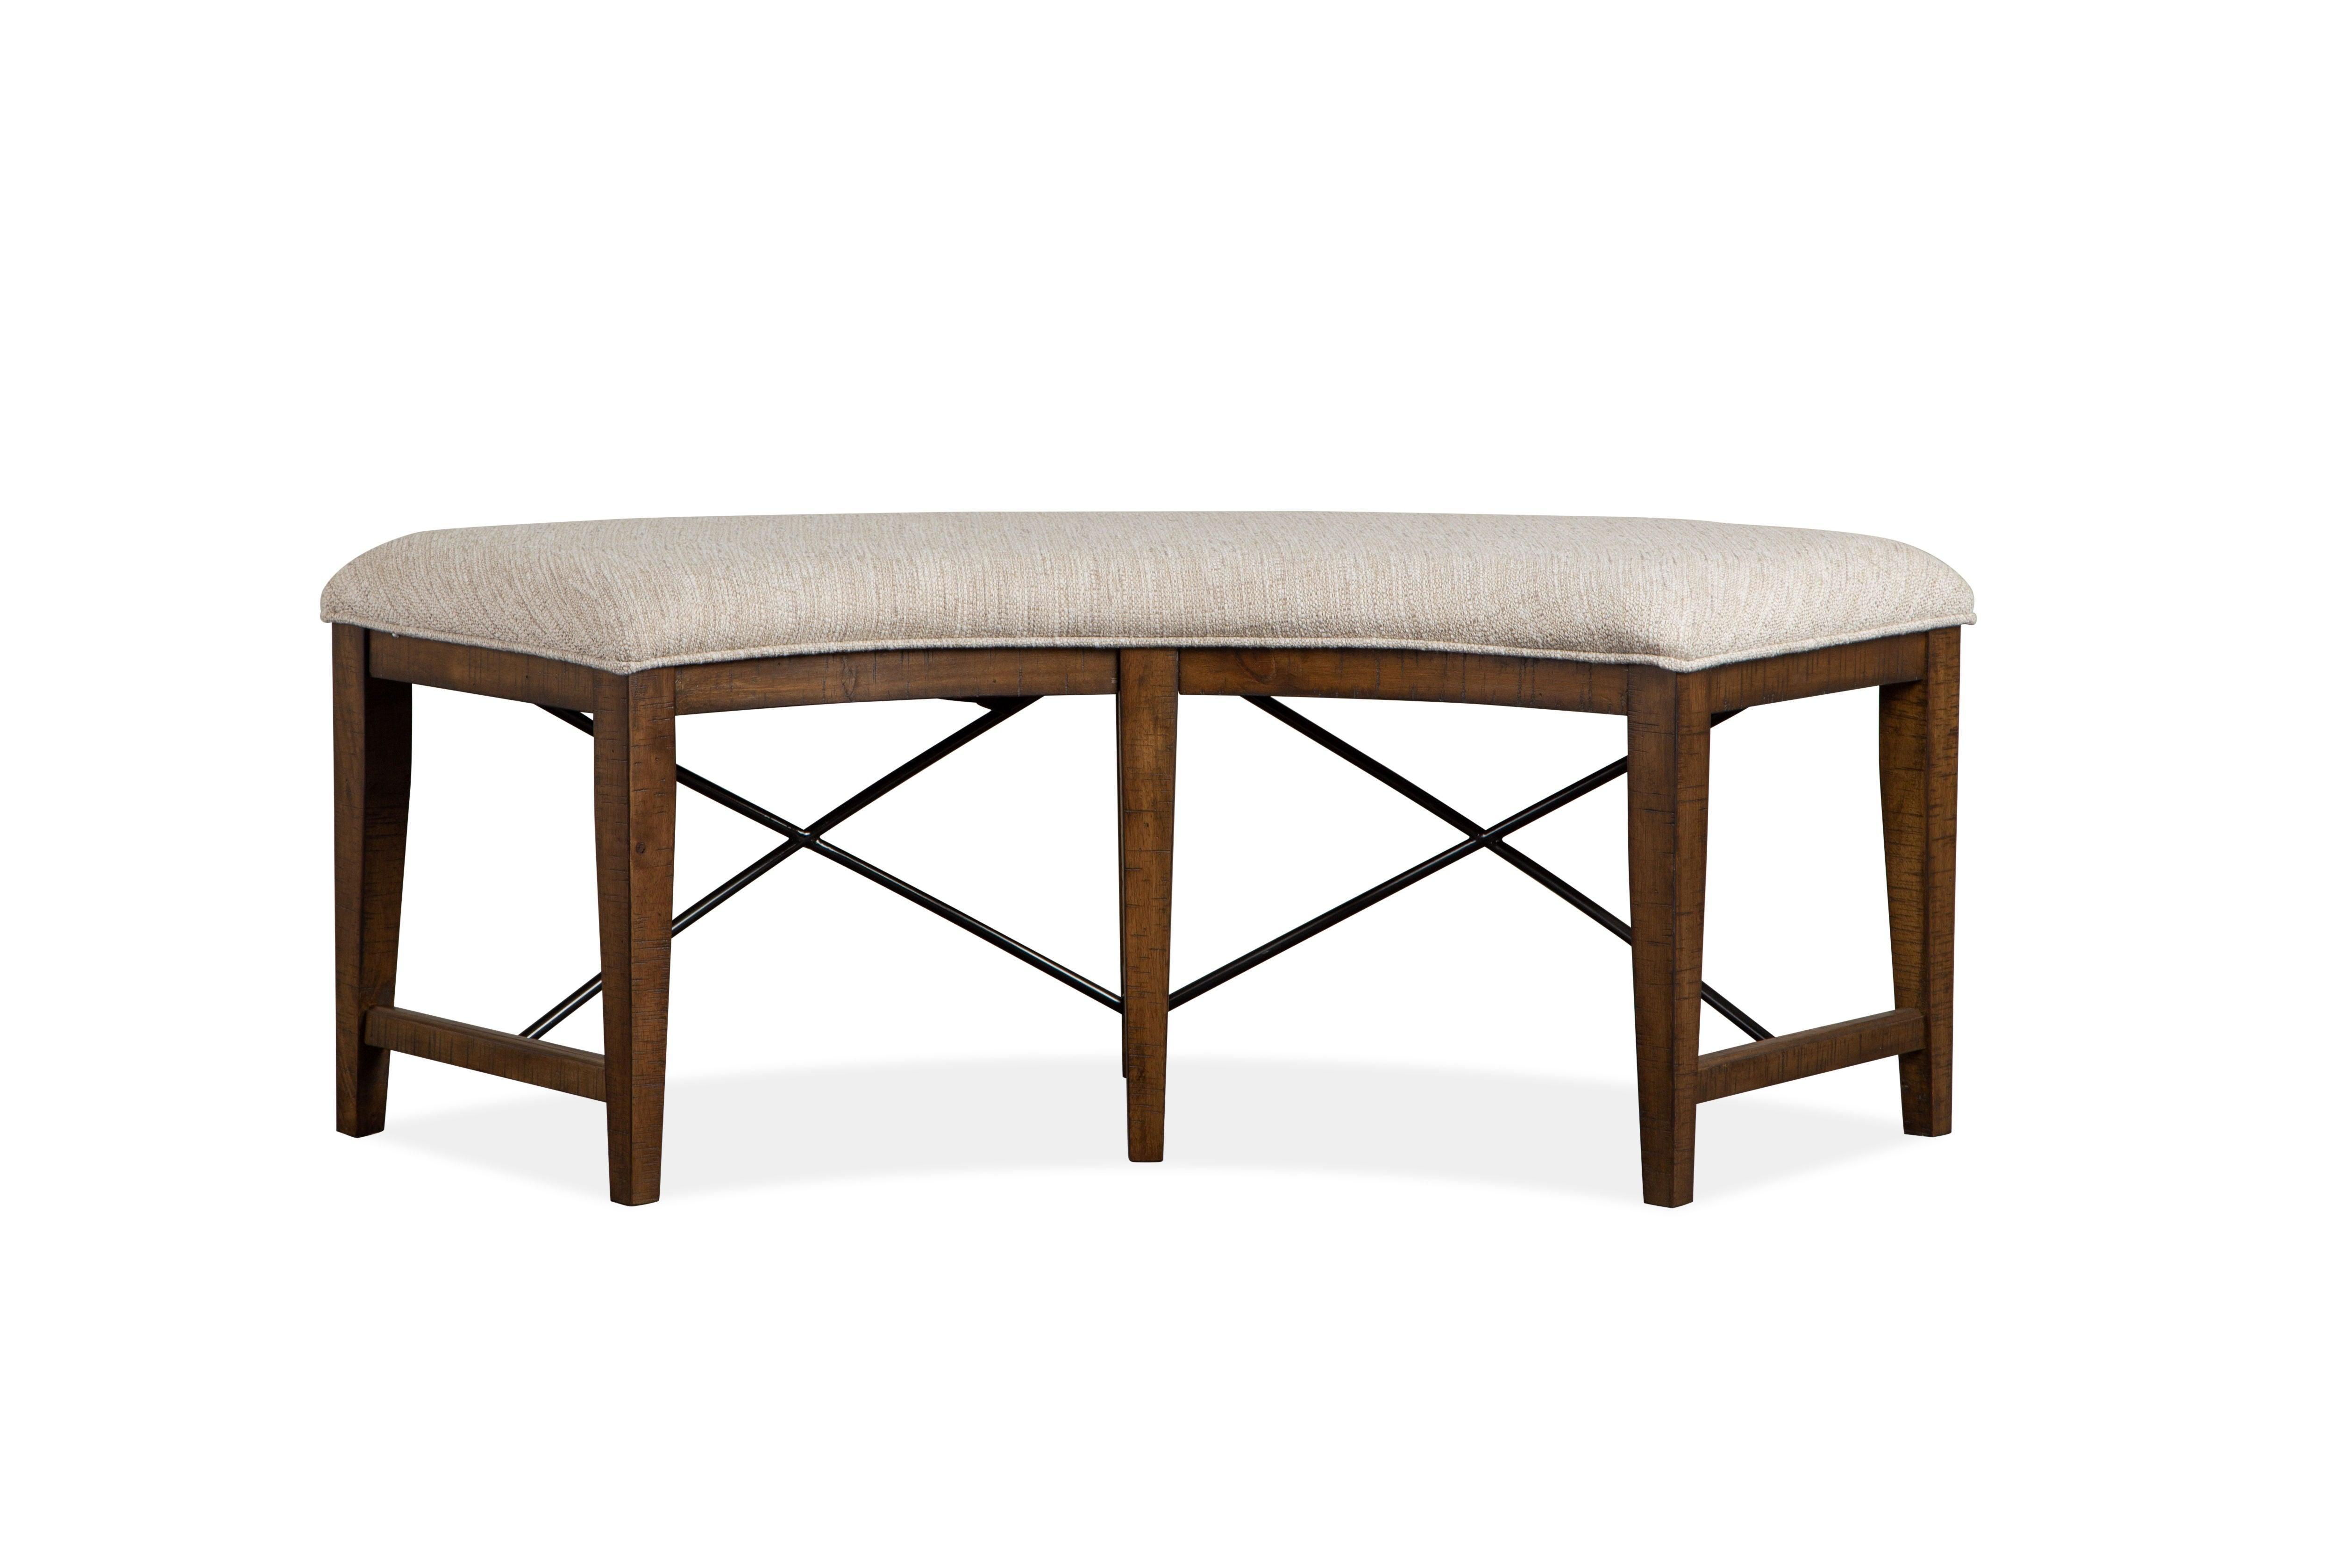 Magnussen Furniture - Bay Creek - Curved Bench With Upholstered Seat - Toasted Nutmeg - 5th Avenue Furniture